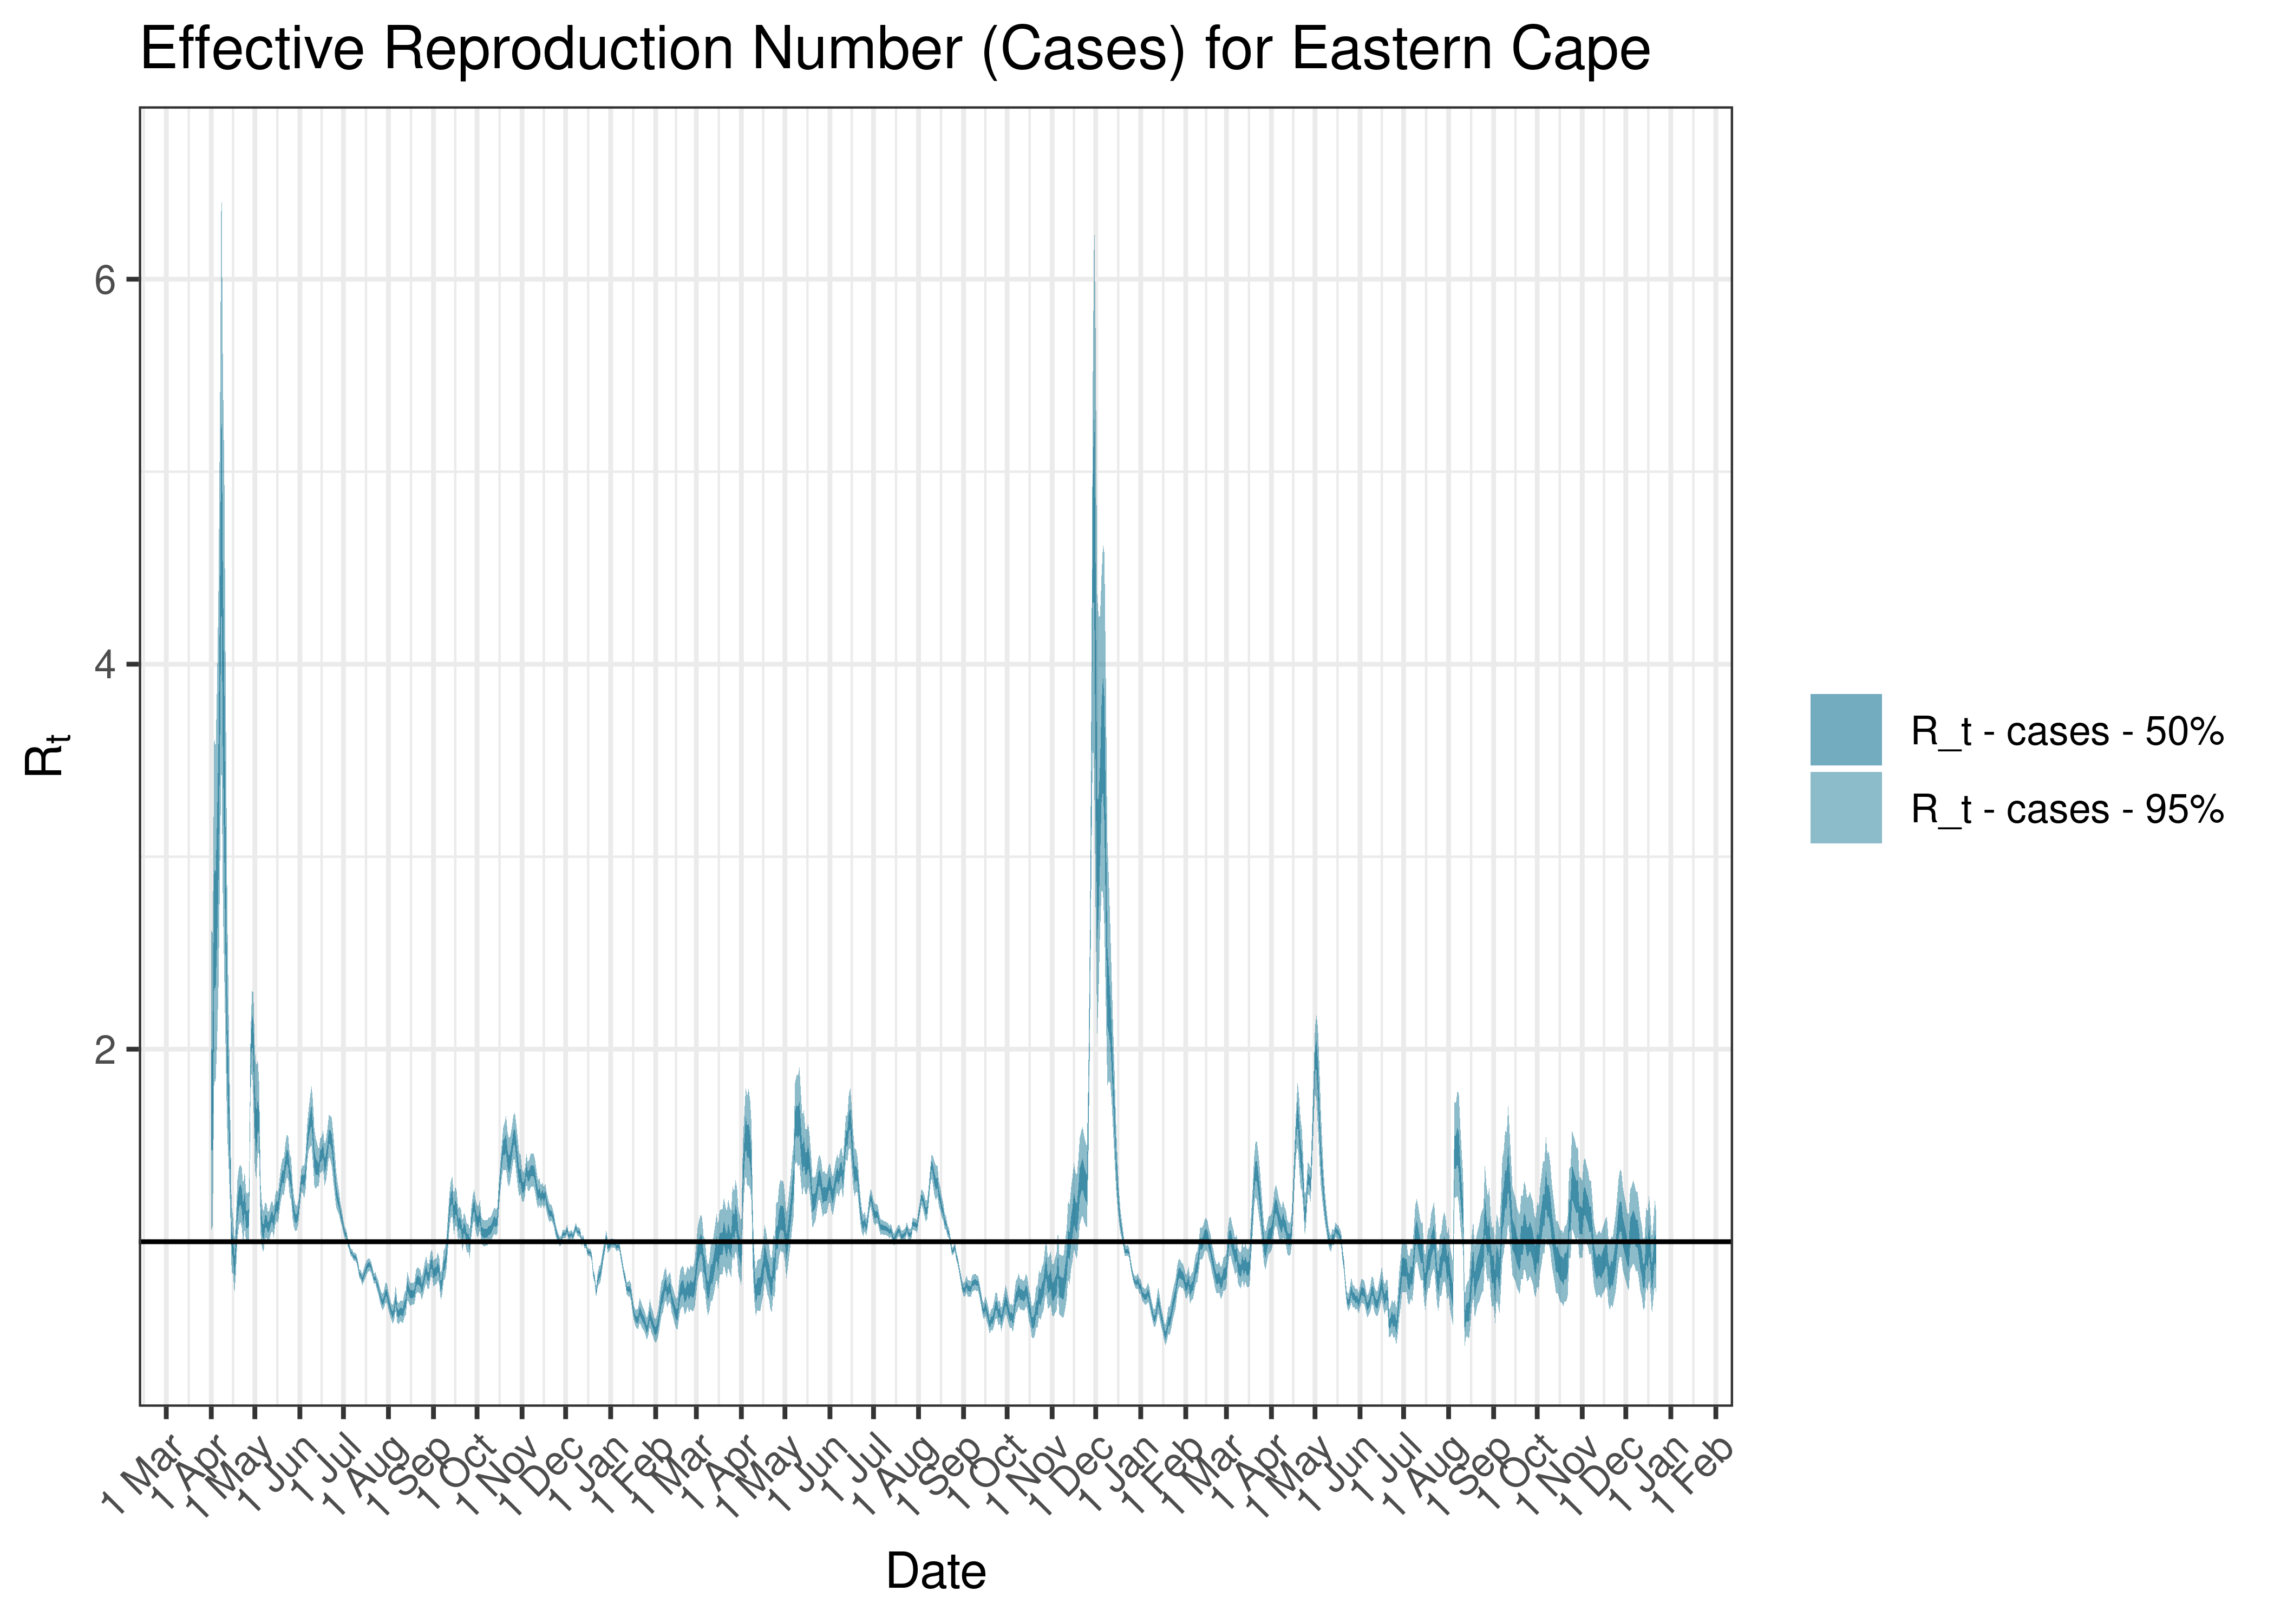 Estimated Effective Reproduction Number Based on Cases for Eastern Cape since 1 April 2020